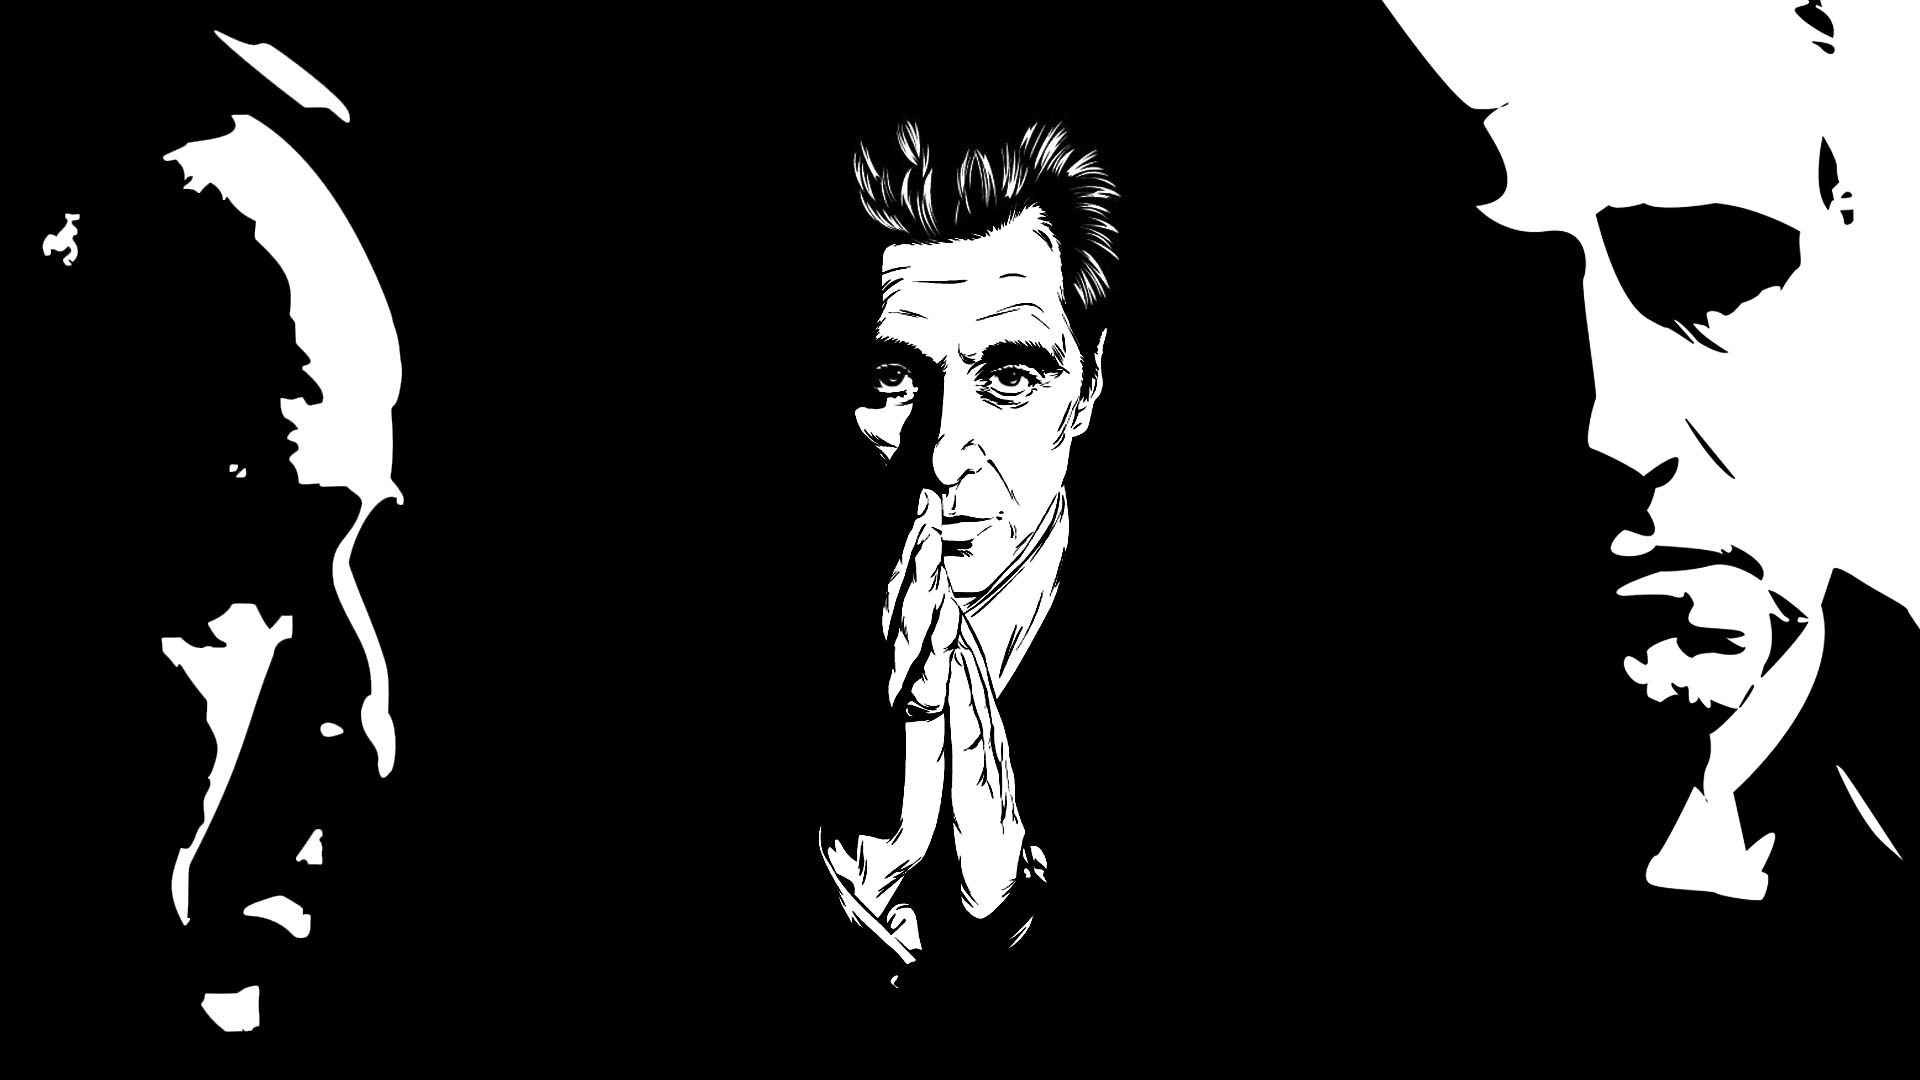 1280x829 / the godfather desktop wallpaper - Coolwallpapers.me!